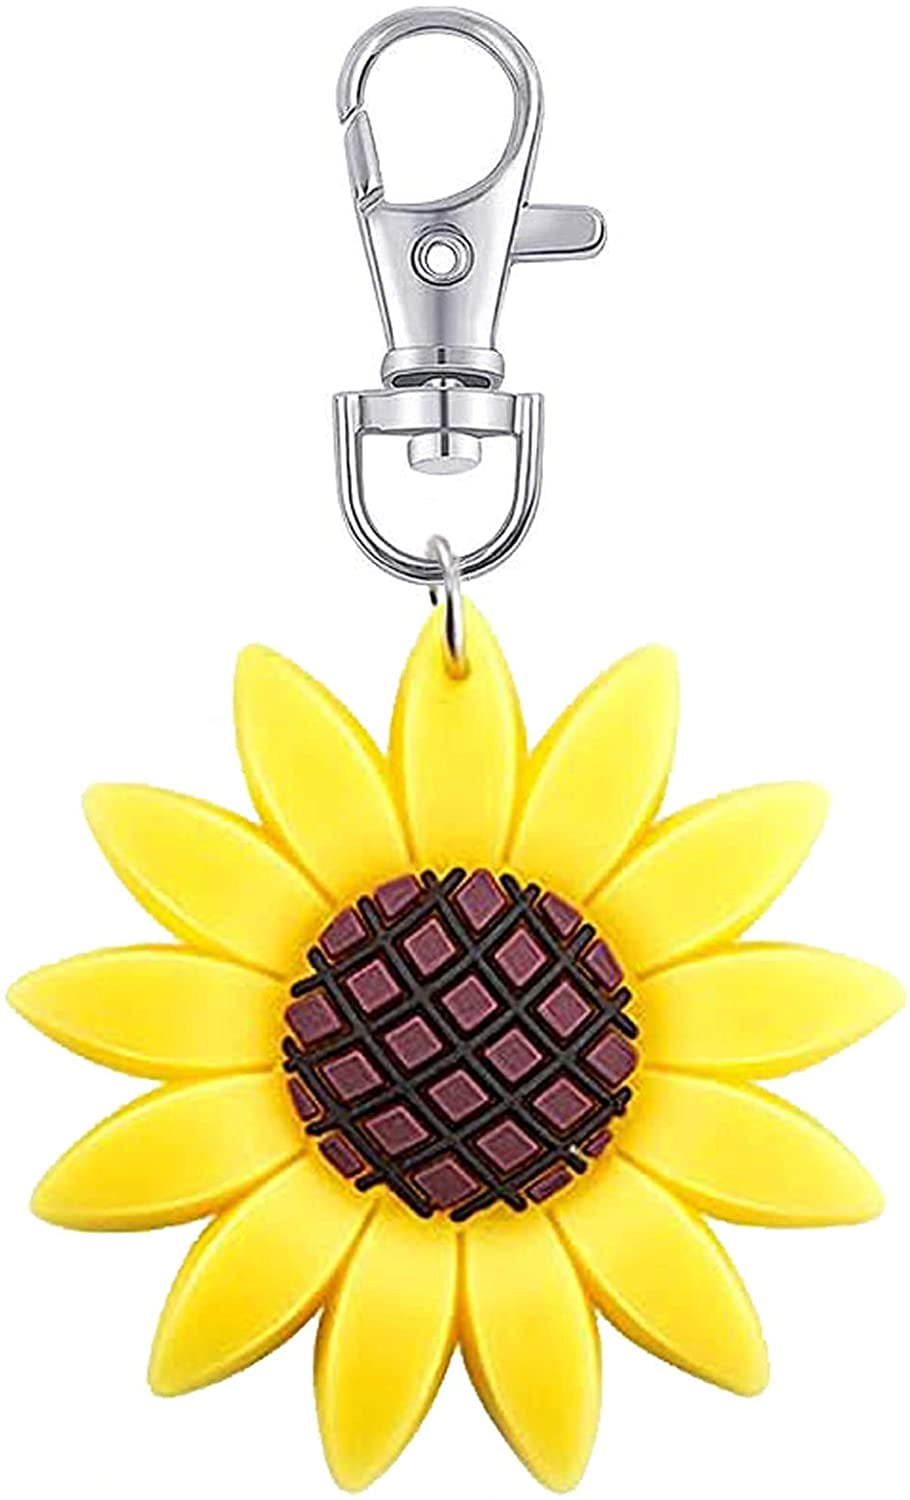 15 Pcs Baby Shower Return Favors for Guests,Sunflower Keychains+Thank You Kraft Tags for Birthday Party Supplies